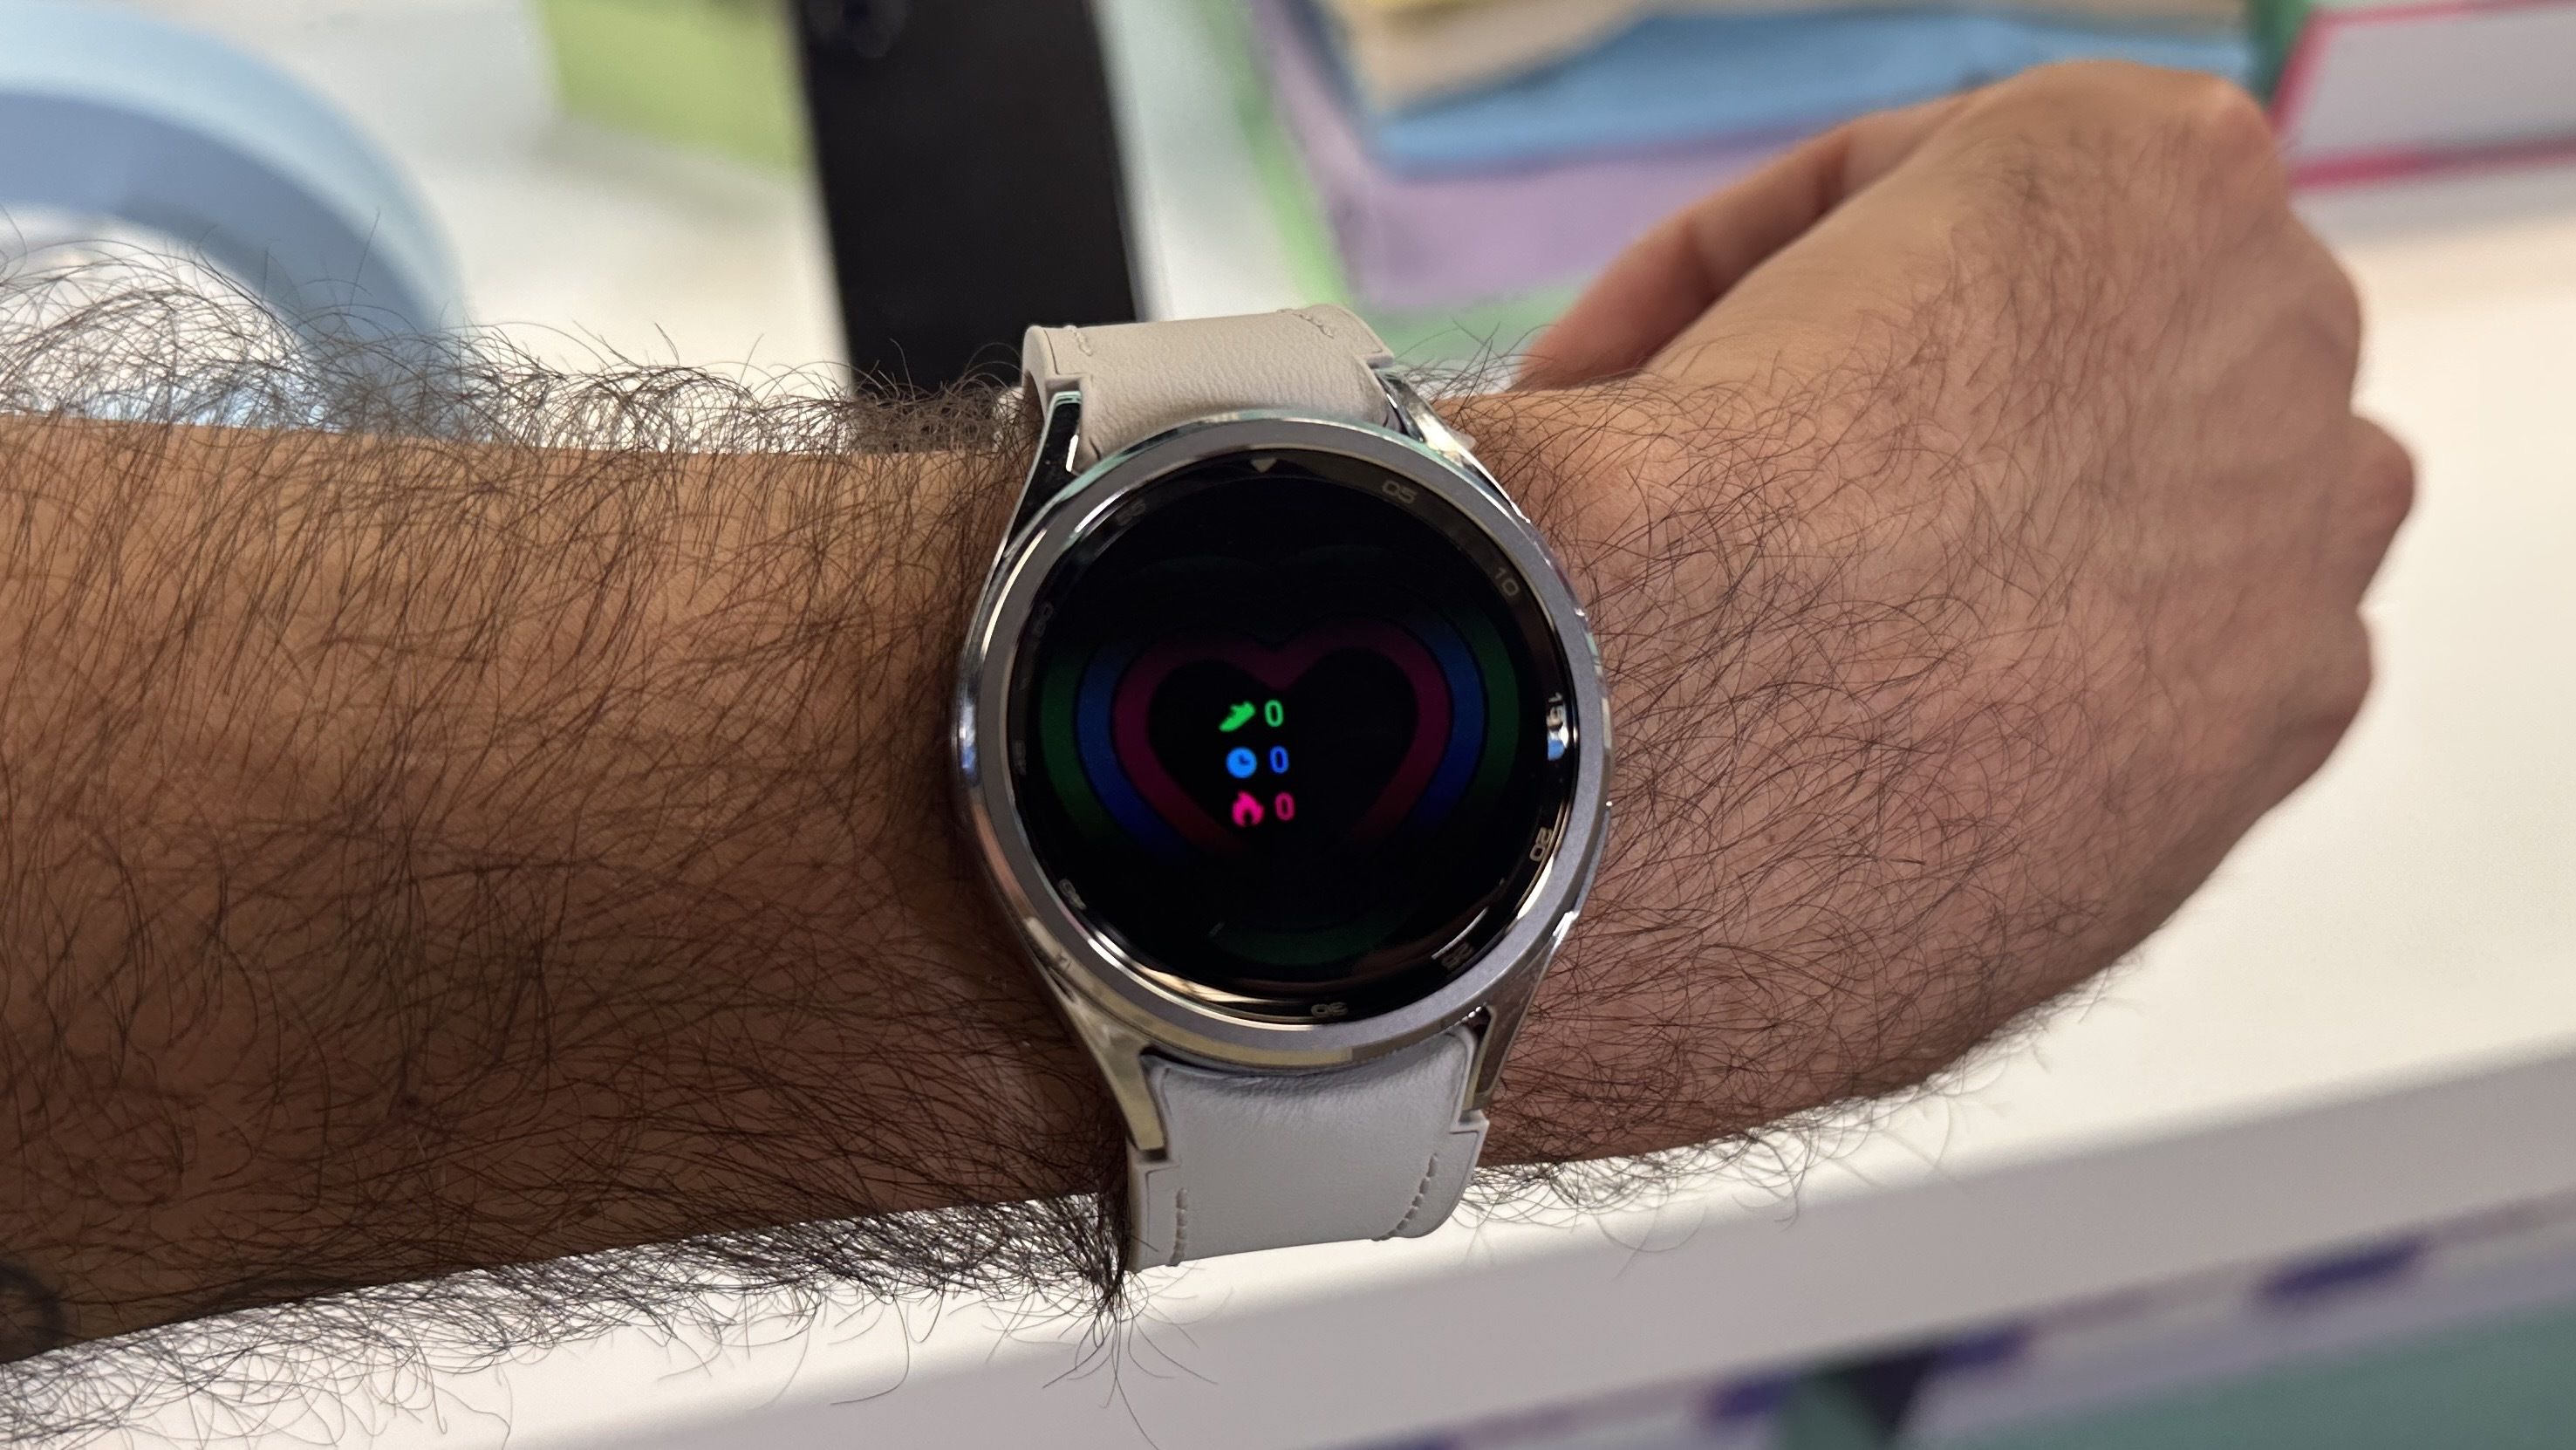 Samsung galaxy watch 4 • Compare & see prices now »